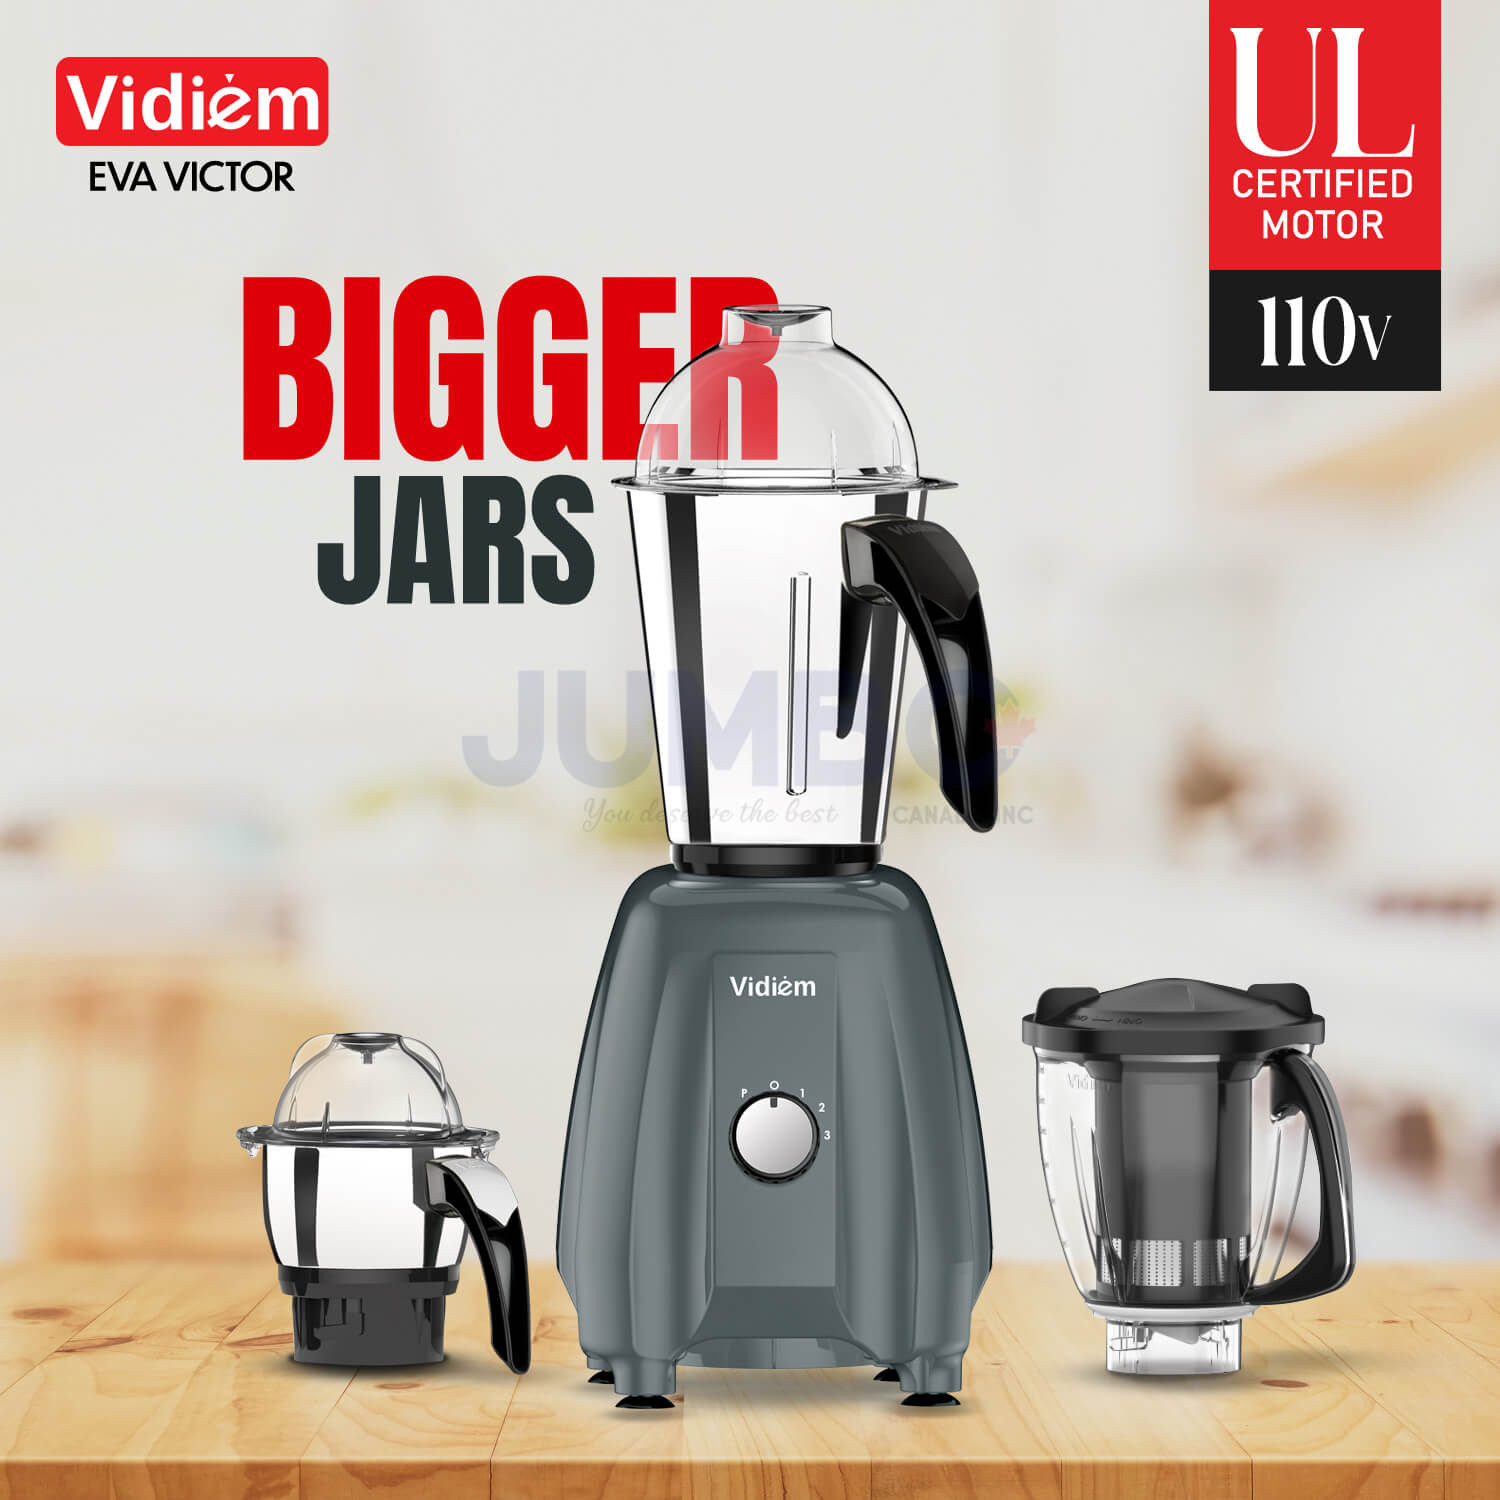 vidiem-eva-victor-650w-110v-stainless-steel-jars-indian-mixer-grinder-spice-coffee-grinder-with-almond-nut-milk-juice-extractor-for-use-in-canada-usa8